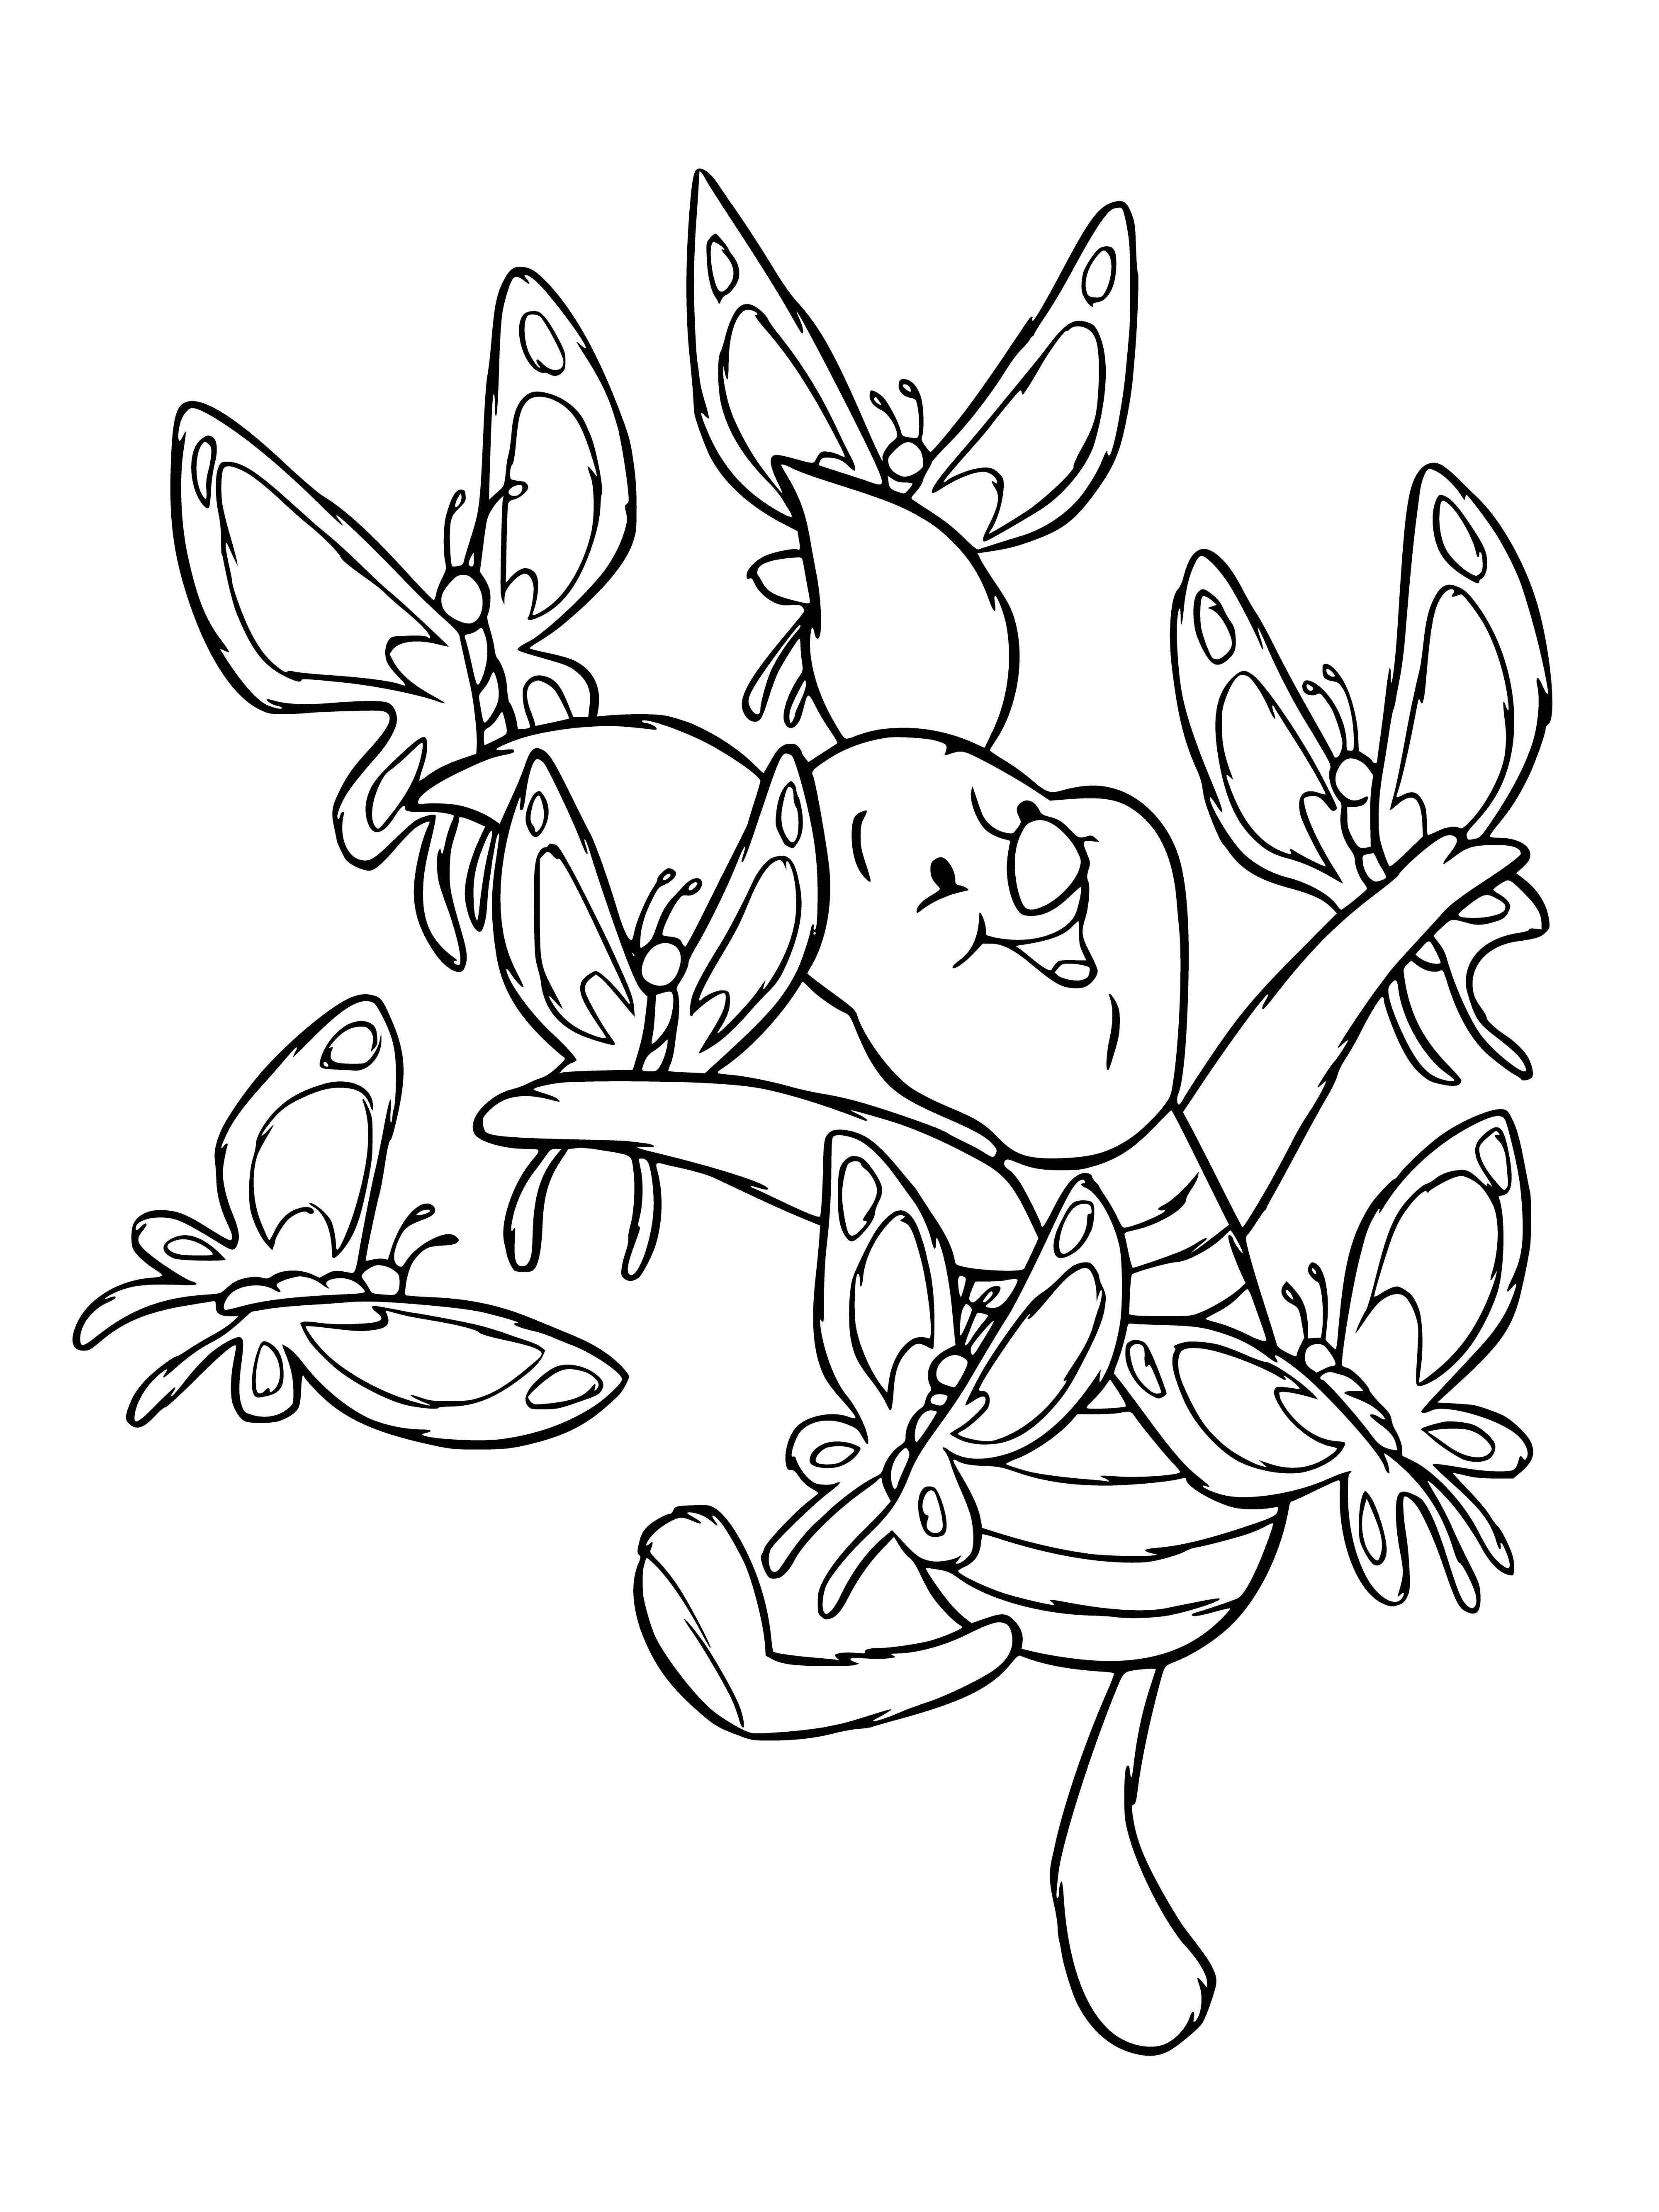 Pig and butterflies coloring page